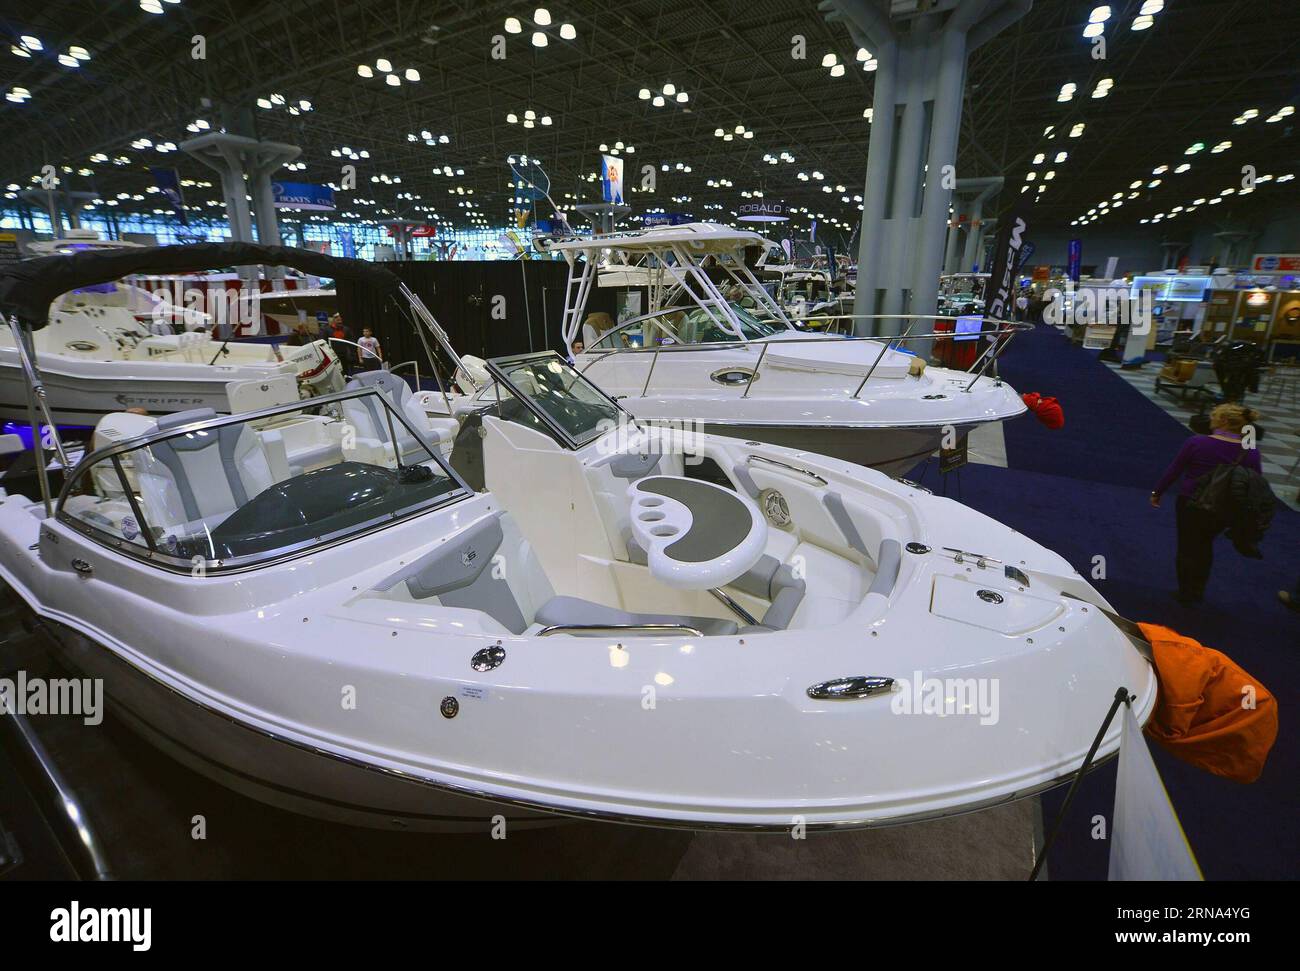 (160106) -- NEW YORK, Jan. 6, 2016 -- People visit New York Boat Show in New York, the United States, on Jan. 6, 2016. The five-day New York Boat Show which features the latest and greatest in boating, including kayaks, yachts and water sport boats with high technology kicked off at the Javits Center in New York on Wednesday. ) U.S.-NEW YORK-BOAT SHOW WangxLei PUBLICATIONxNOTxINxCHN   160106 New York Jan 6 2016 Celebrities Visit New York Boat Show in New York The United States ON Jan 6 2016 The Five Day New York Boat Show Which Features The Latest and Greatest in Boating including Kayaks Yacht Stock Photo